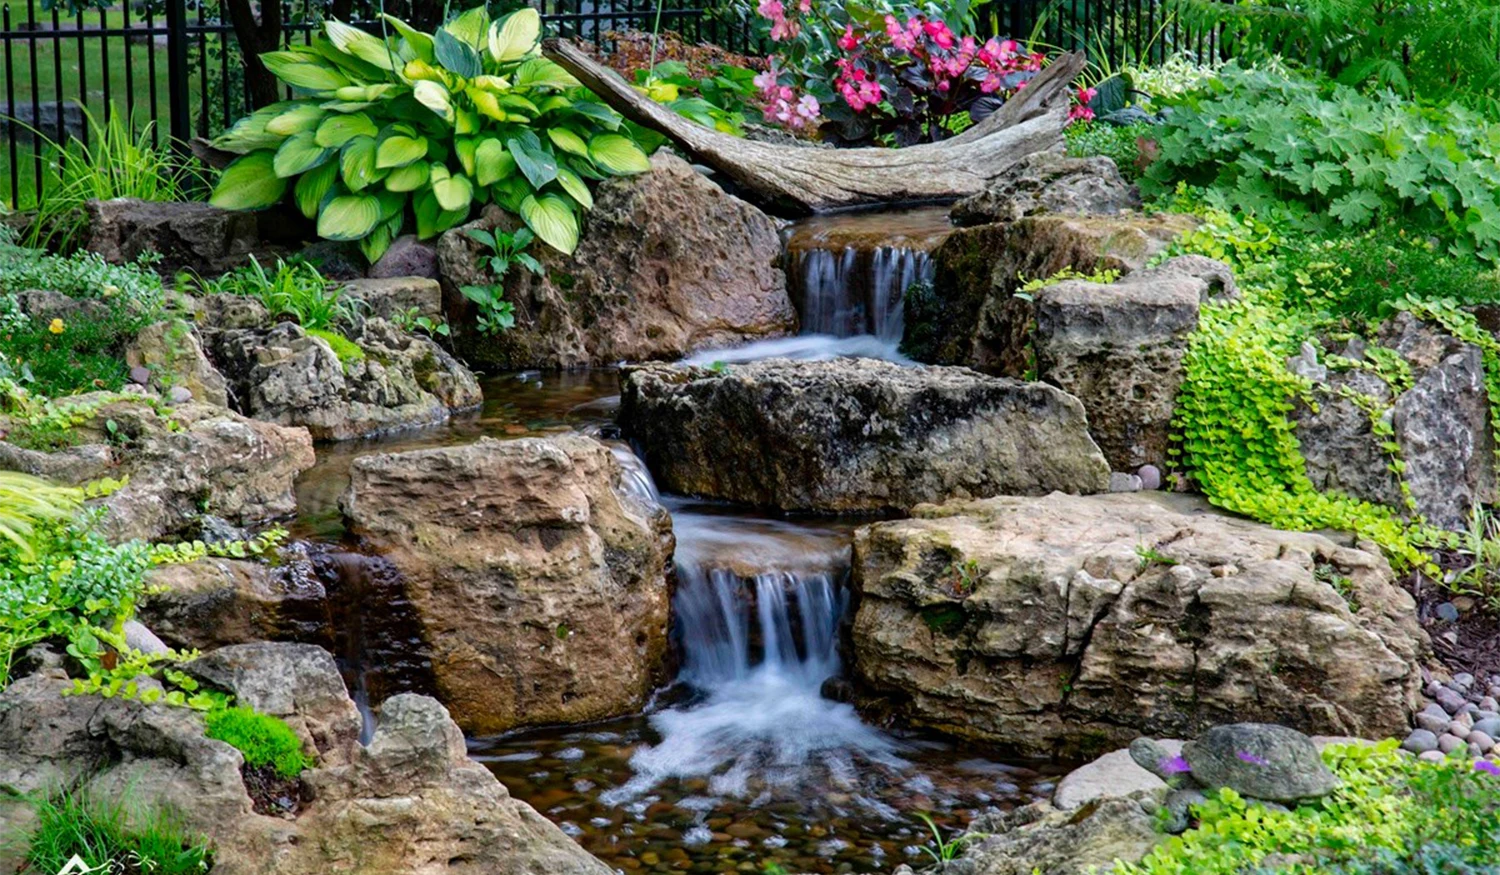 Smaller incredible pondless water feature